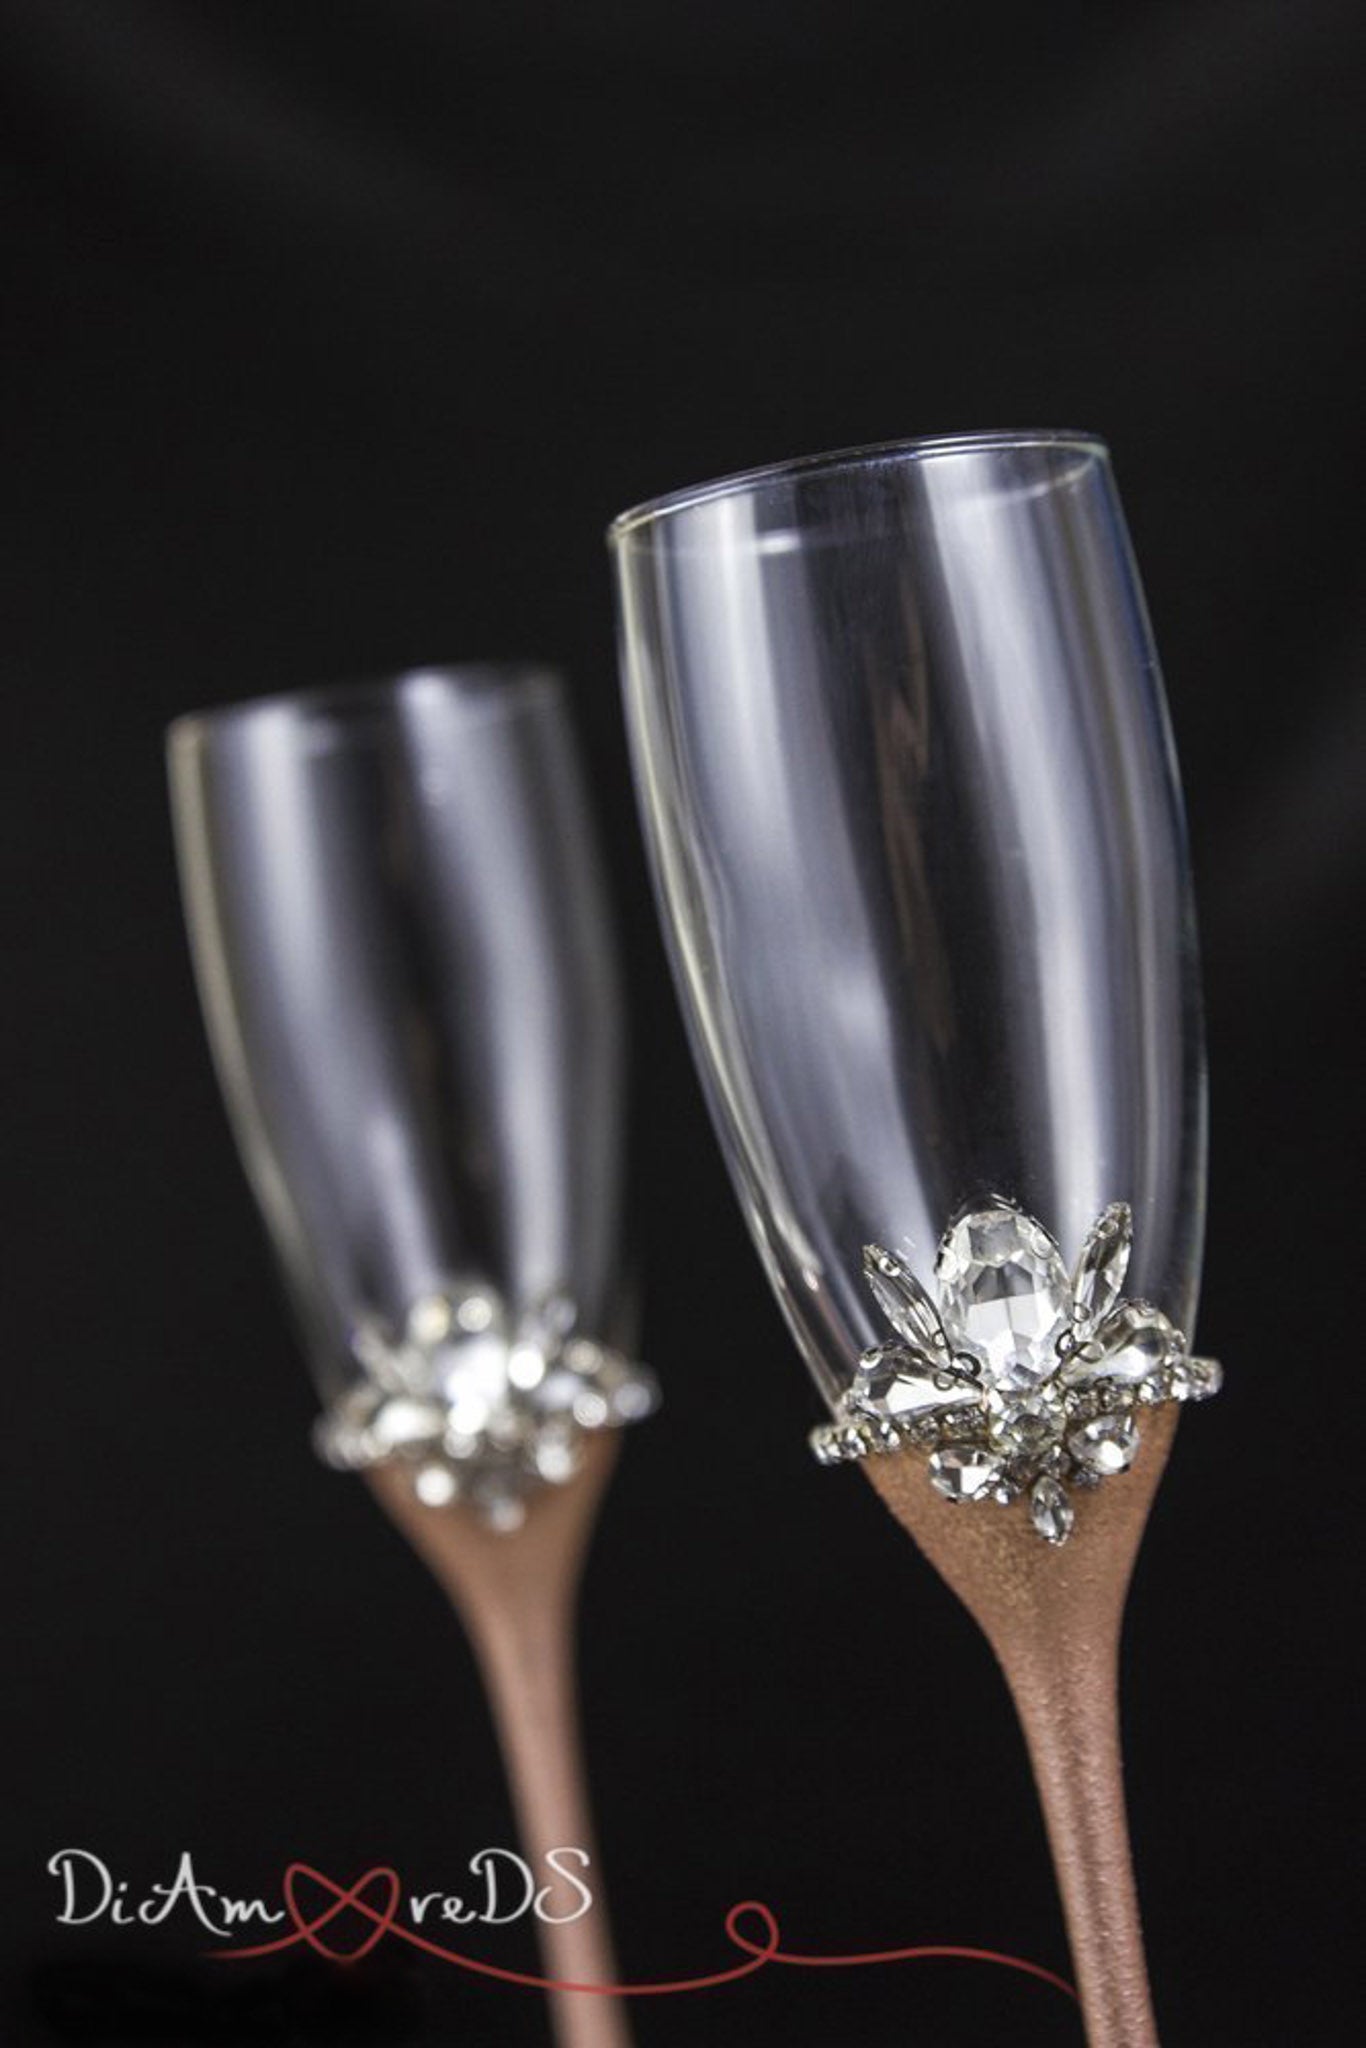 Handcrafted wedding flutes in rose gold and silver